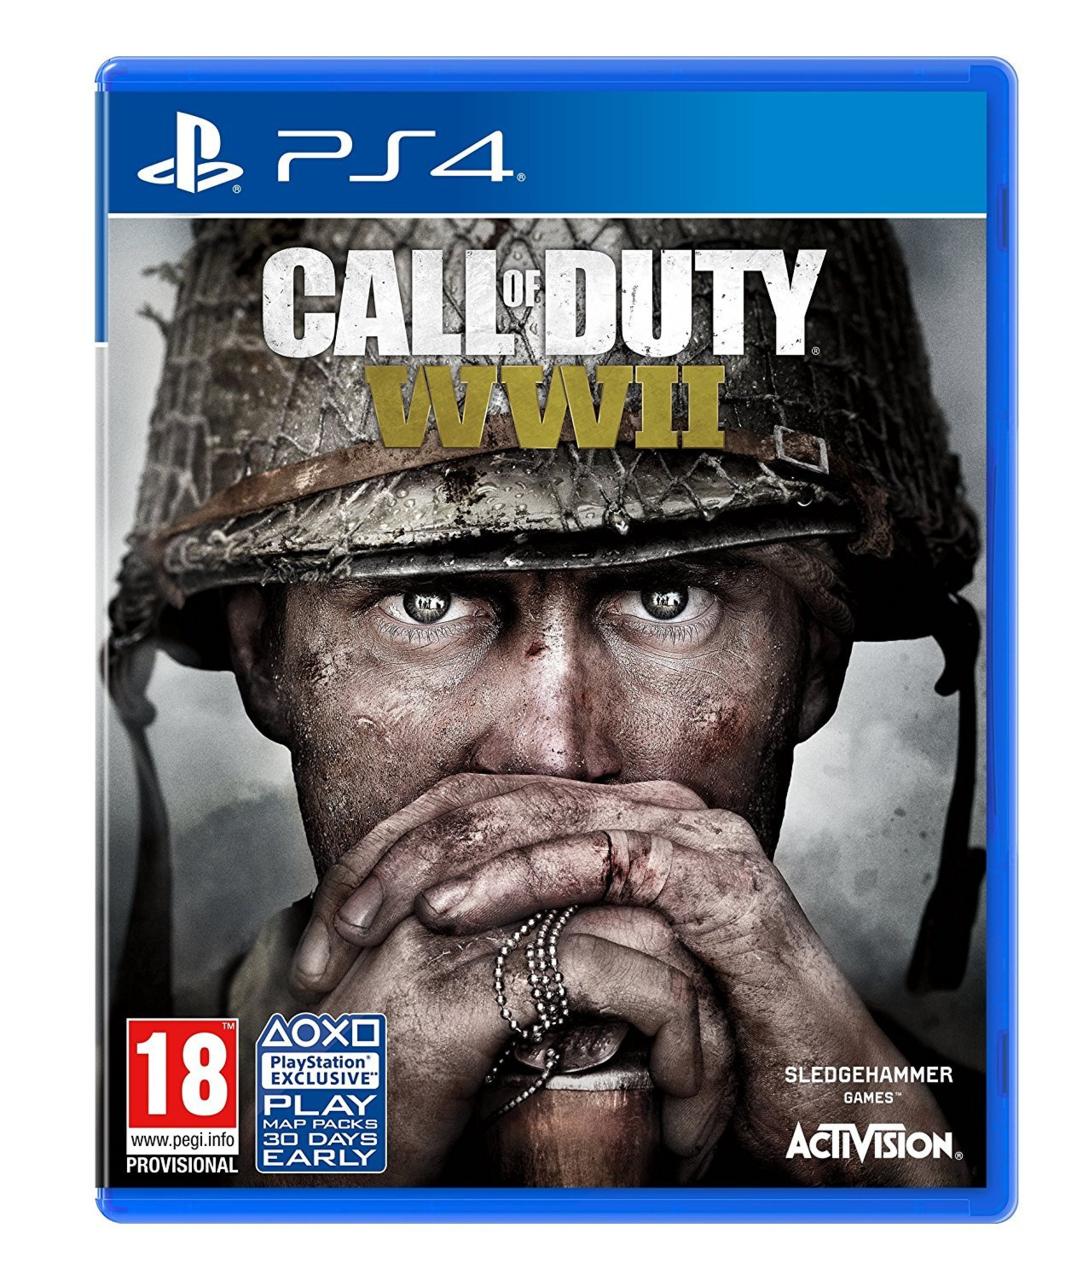 call of duty 2 cover